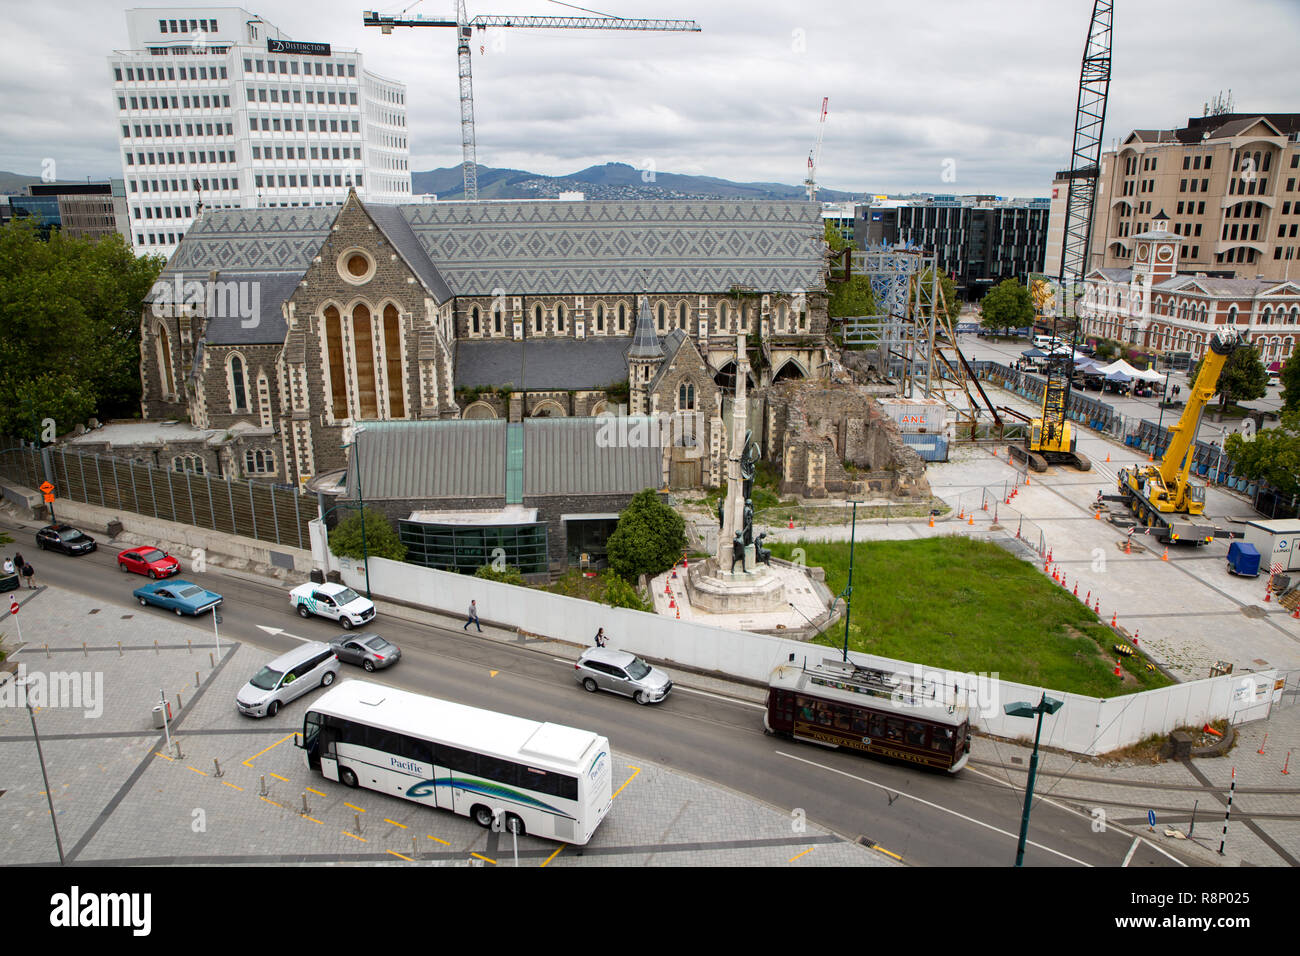 Christchurch, New Zealand - December 16 2018: Construction cranes around the Christchurch Cathedral are ready to dismantle it for repair and restorati Stock Photo